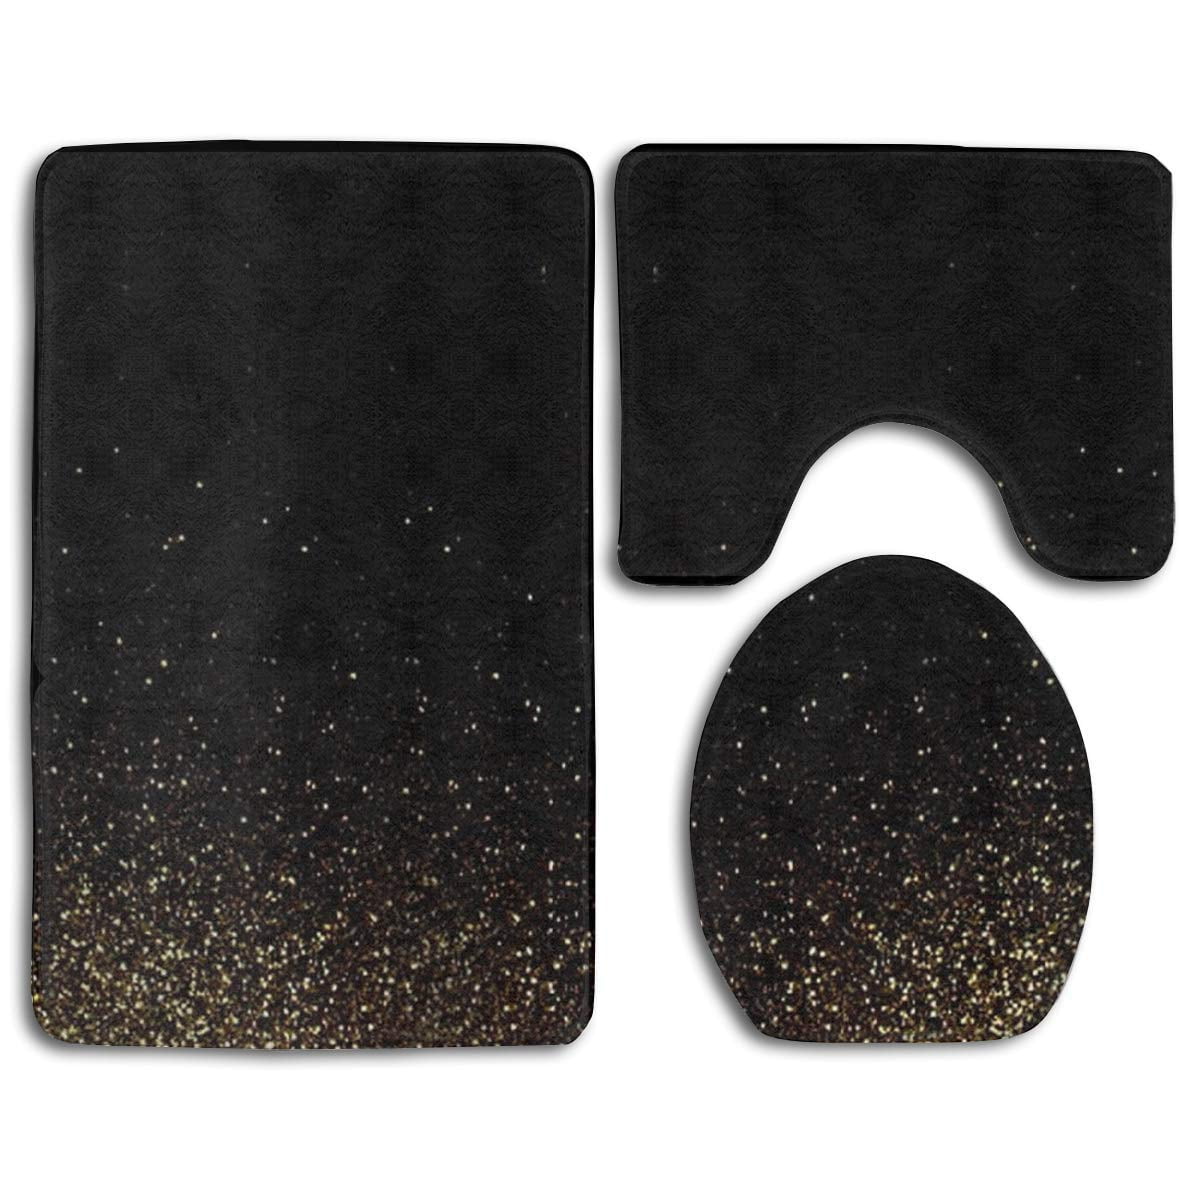 CHAPLLE Gold and Black 3 Piece Bathroom Rugs Set Bath Rug